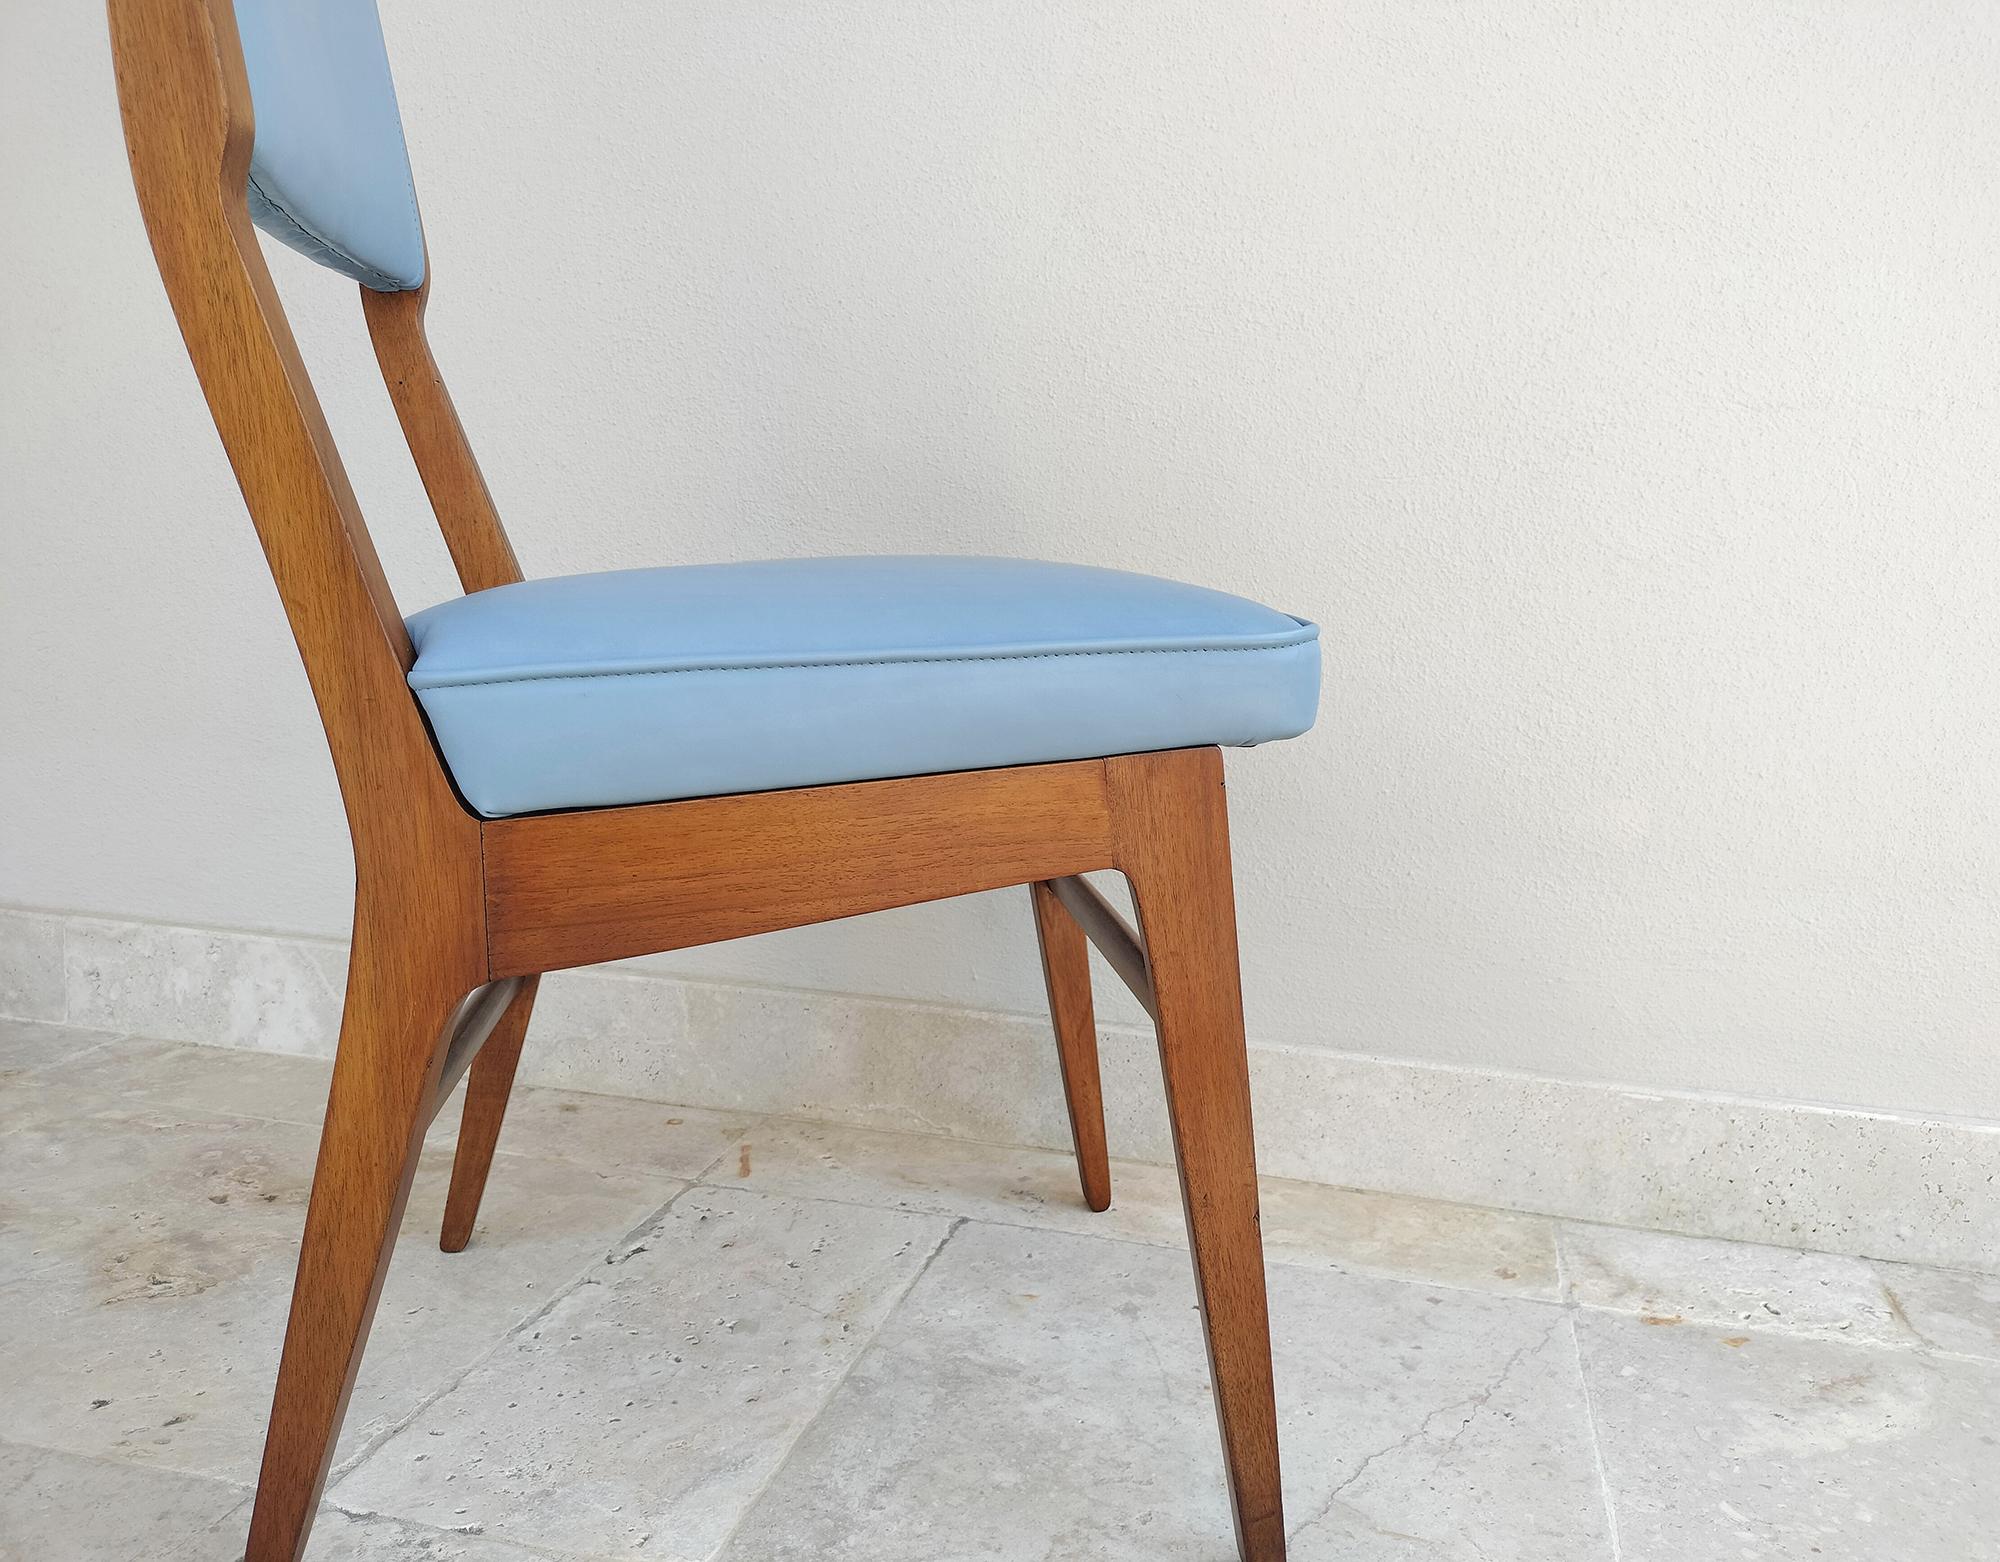 Set of Five I.S.A. Bergamo Chairs Attributed to Gio Ponti 1950s In Good Condition For Sale In Montecatini Terme, IT